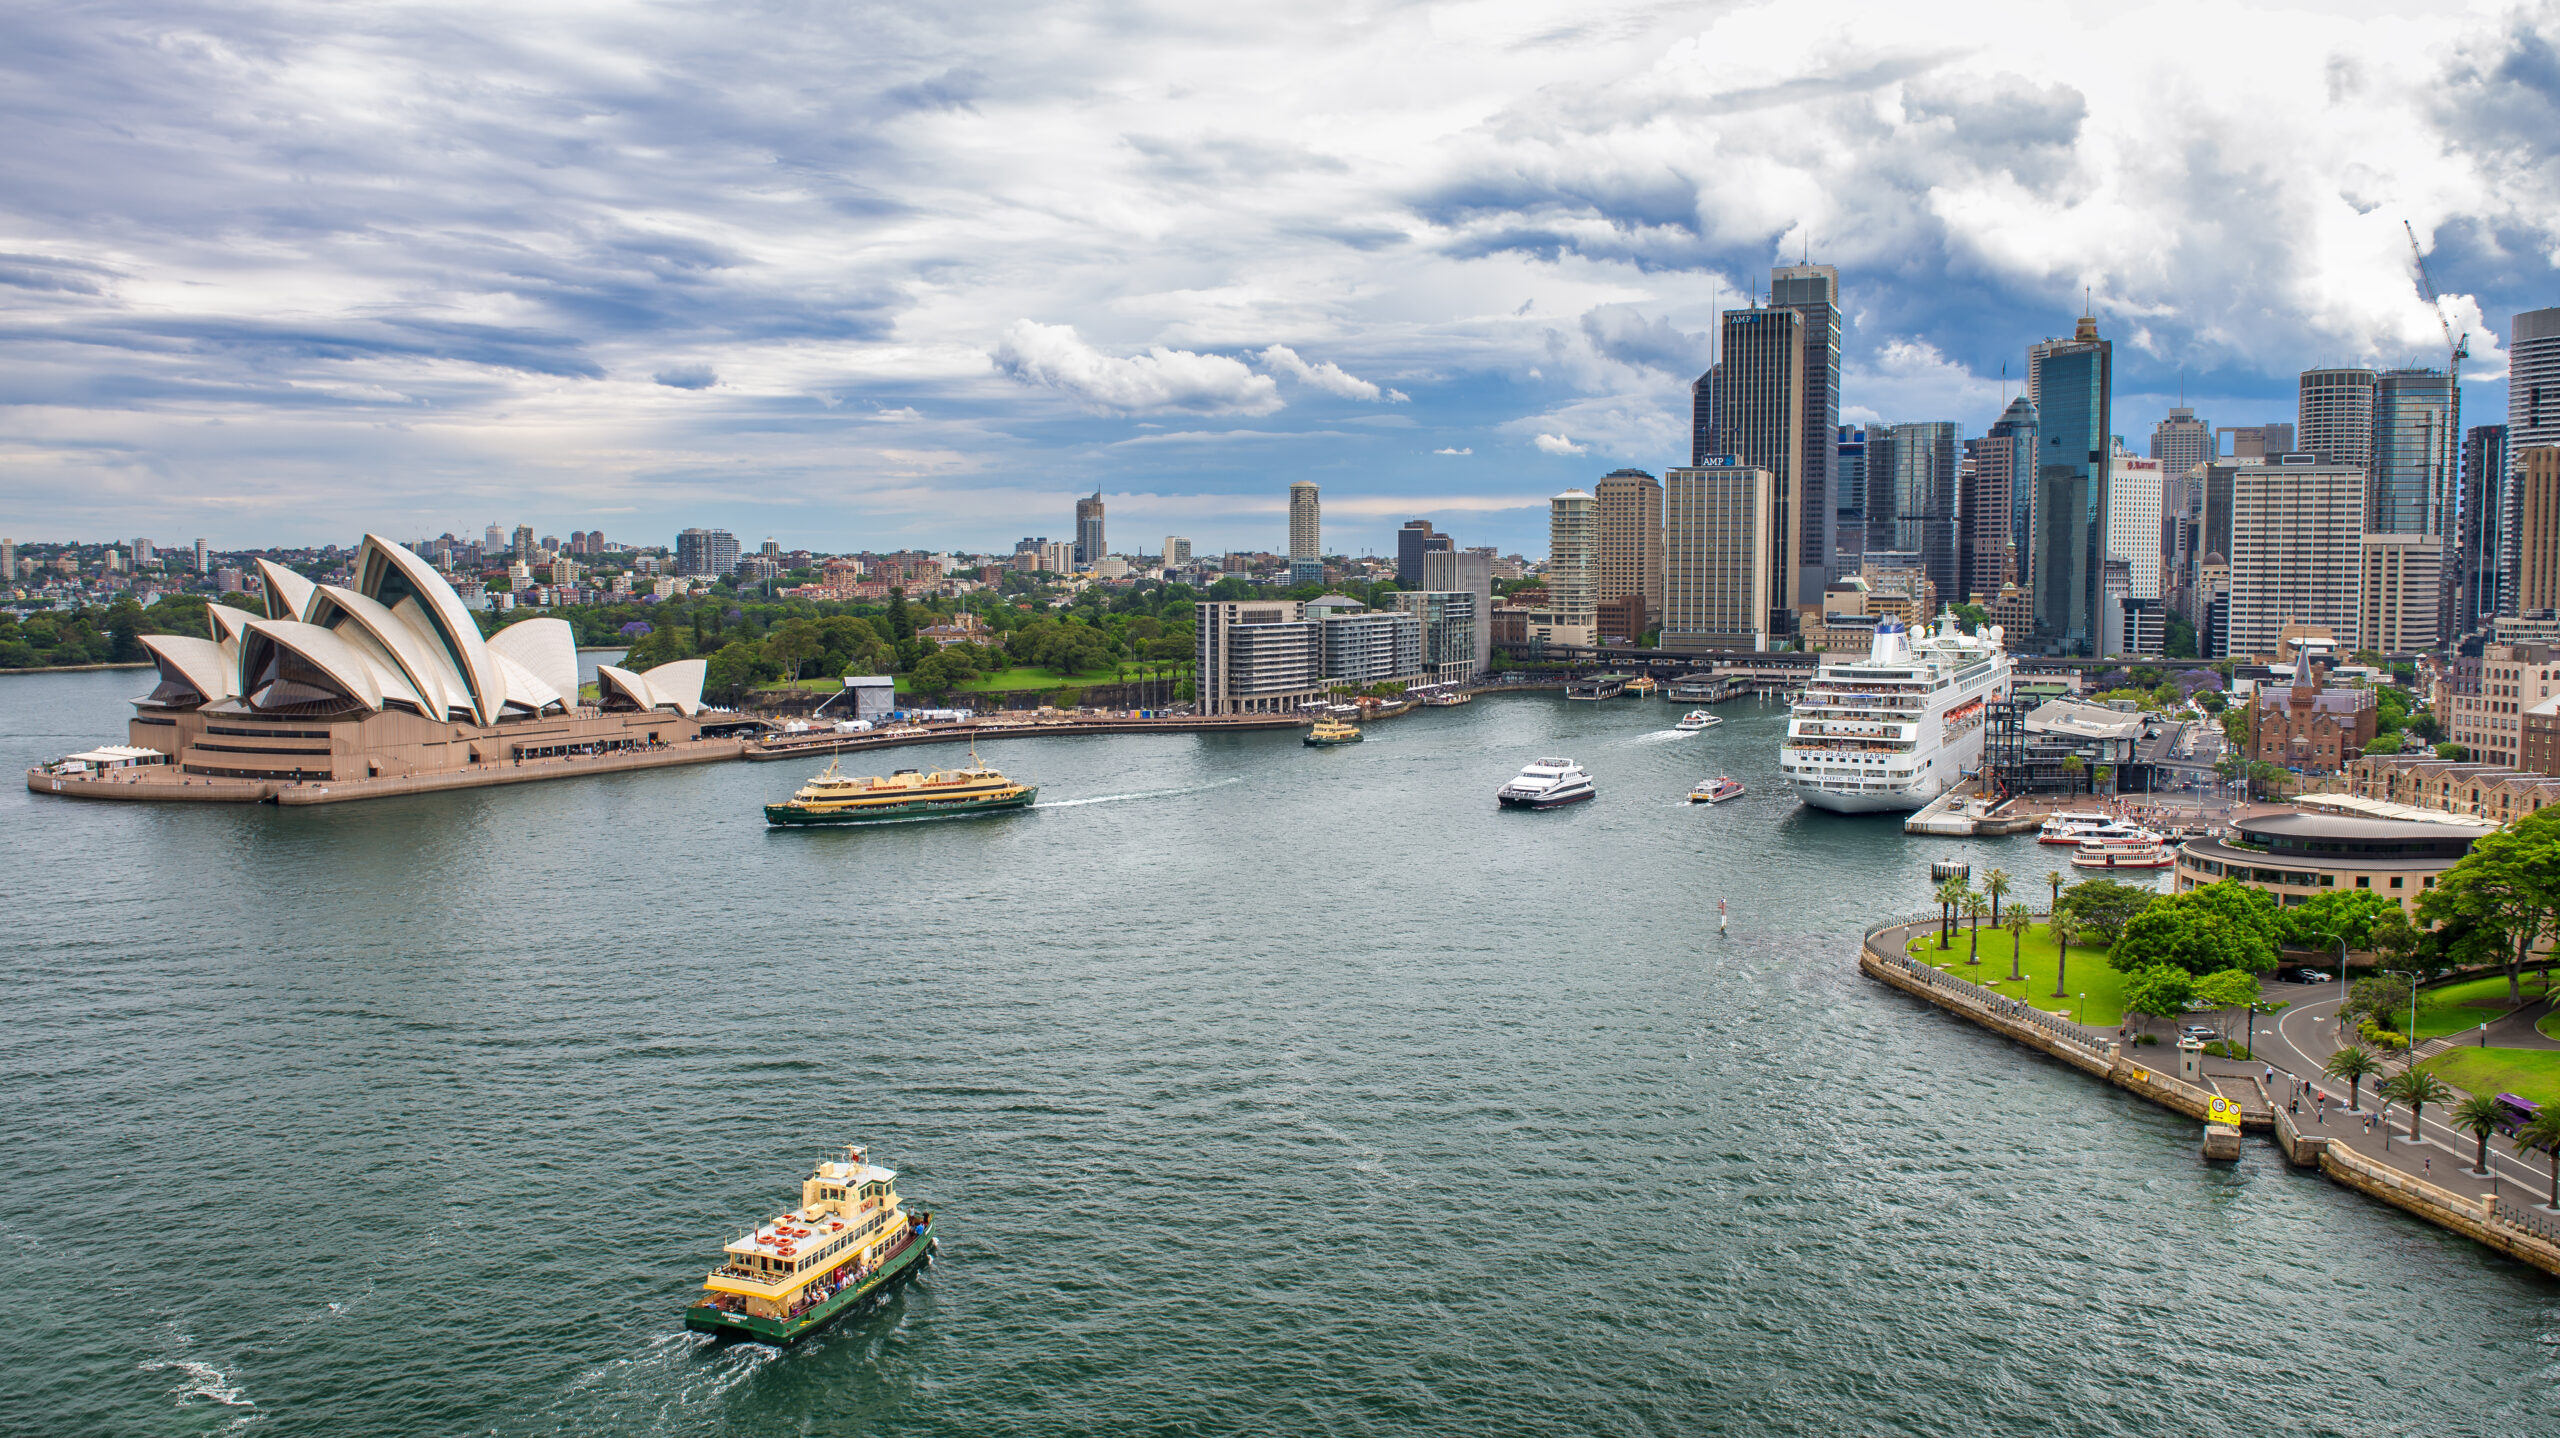 What are the main shipping ports from Australia?